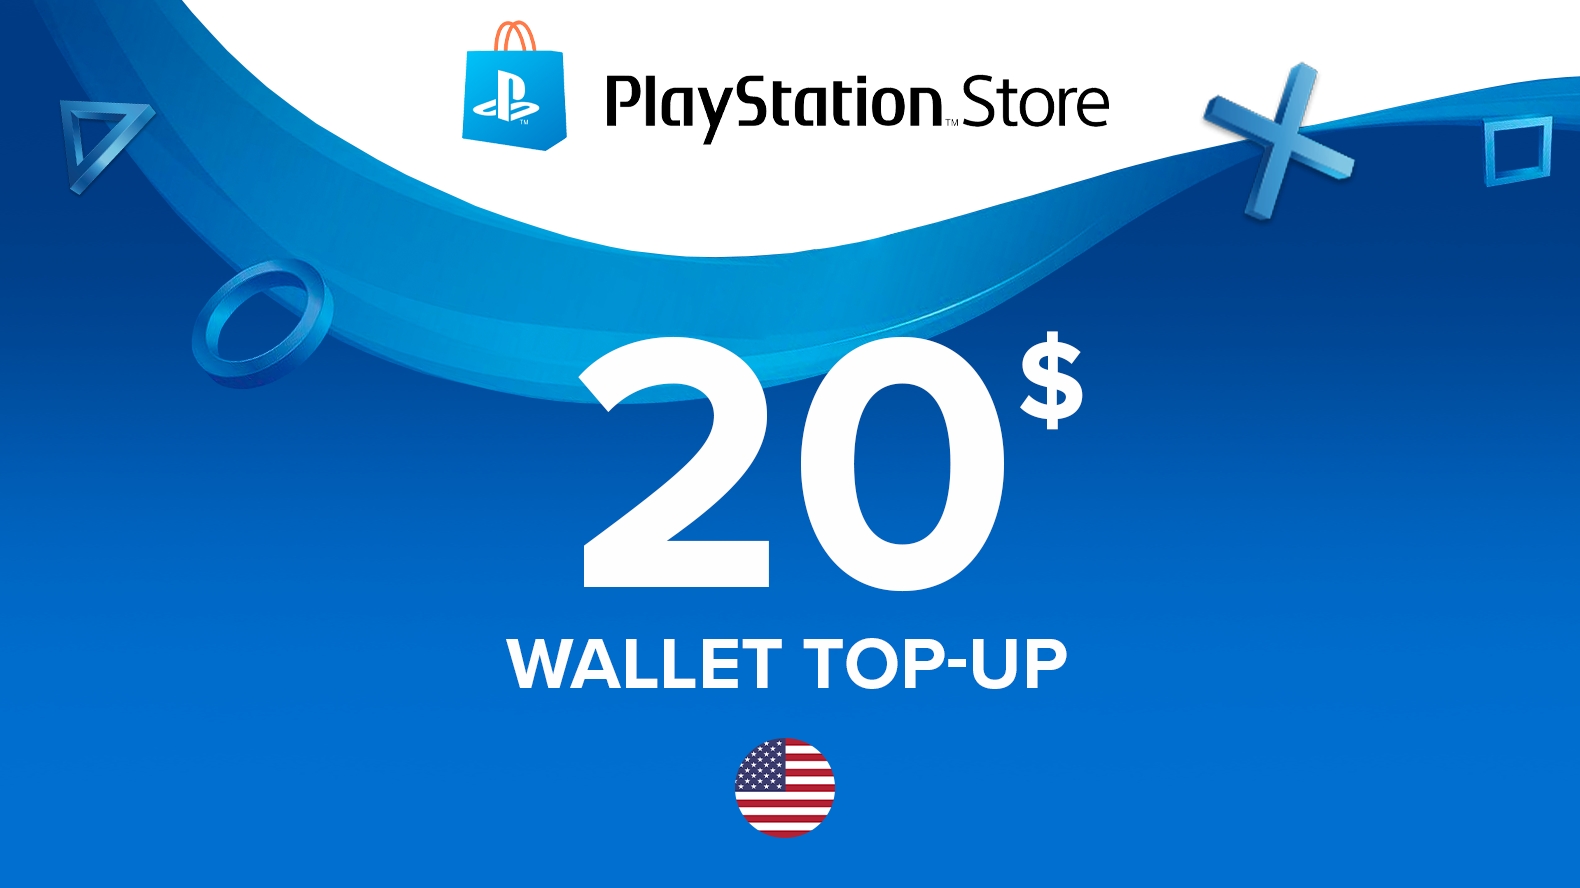 gift a playstation gift card